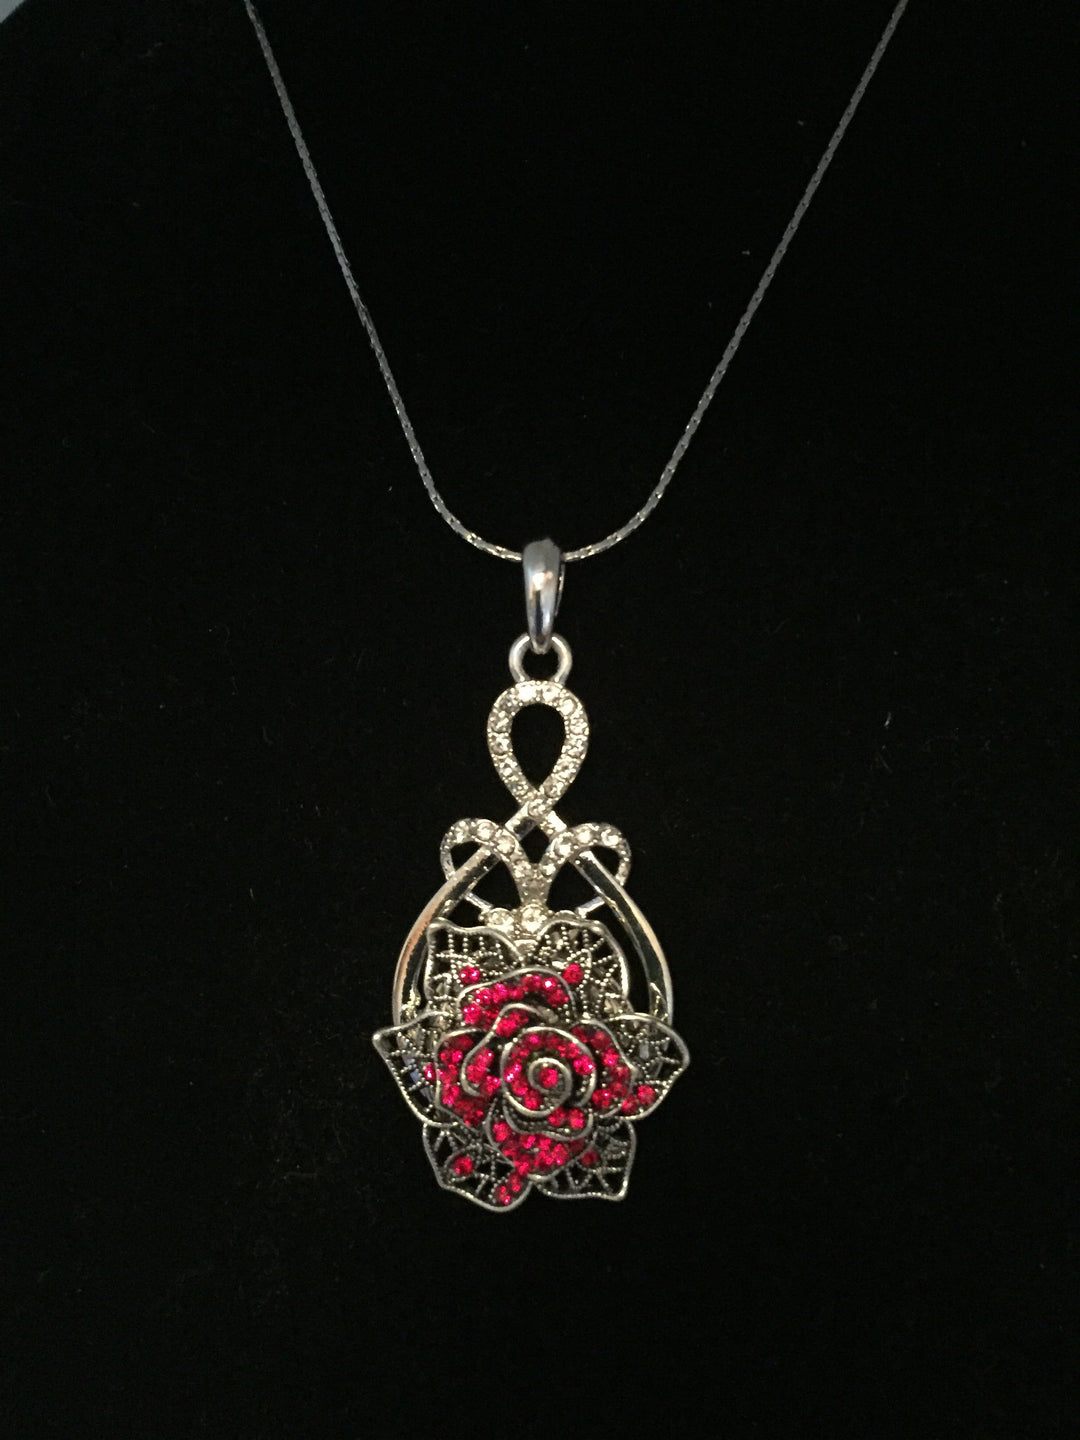 Love knot necklace with rose snap